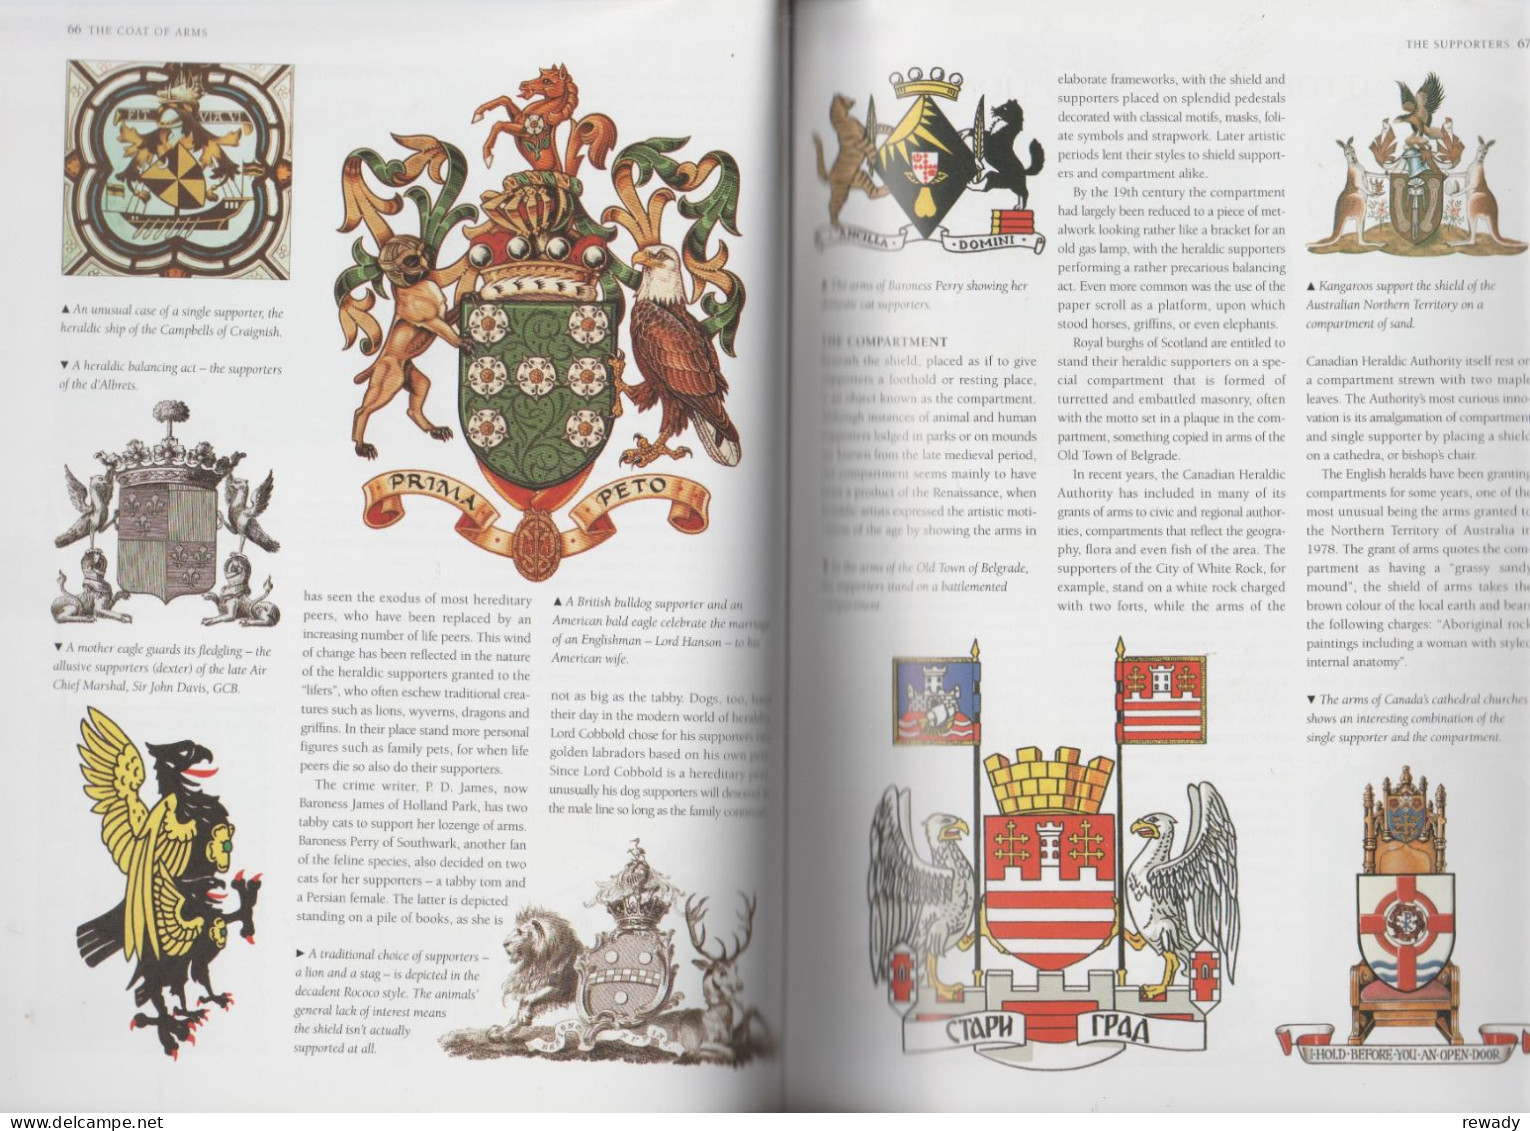 Stephen Slater - The Complete Book Of Heraldry - Livres Sur Les Collections